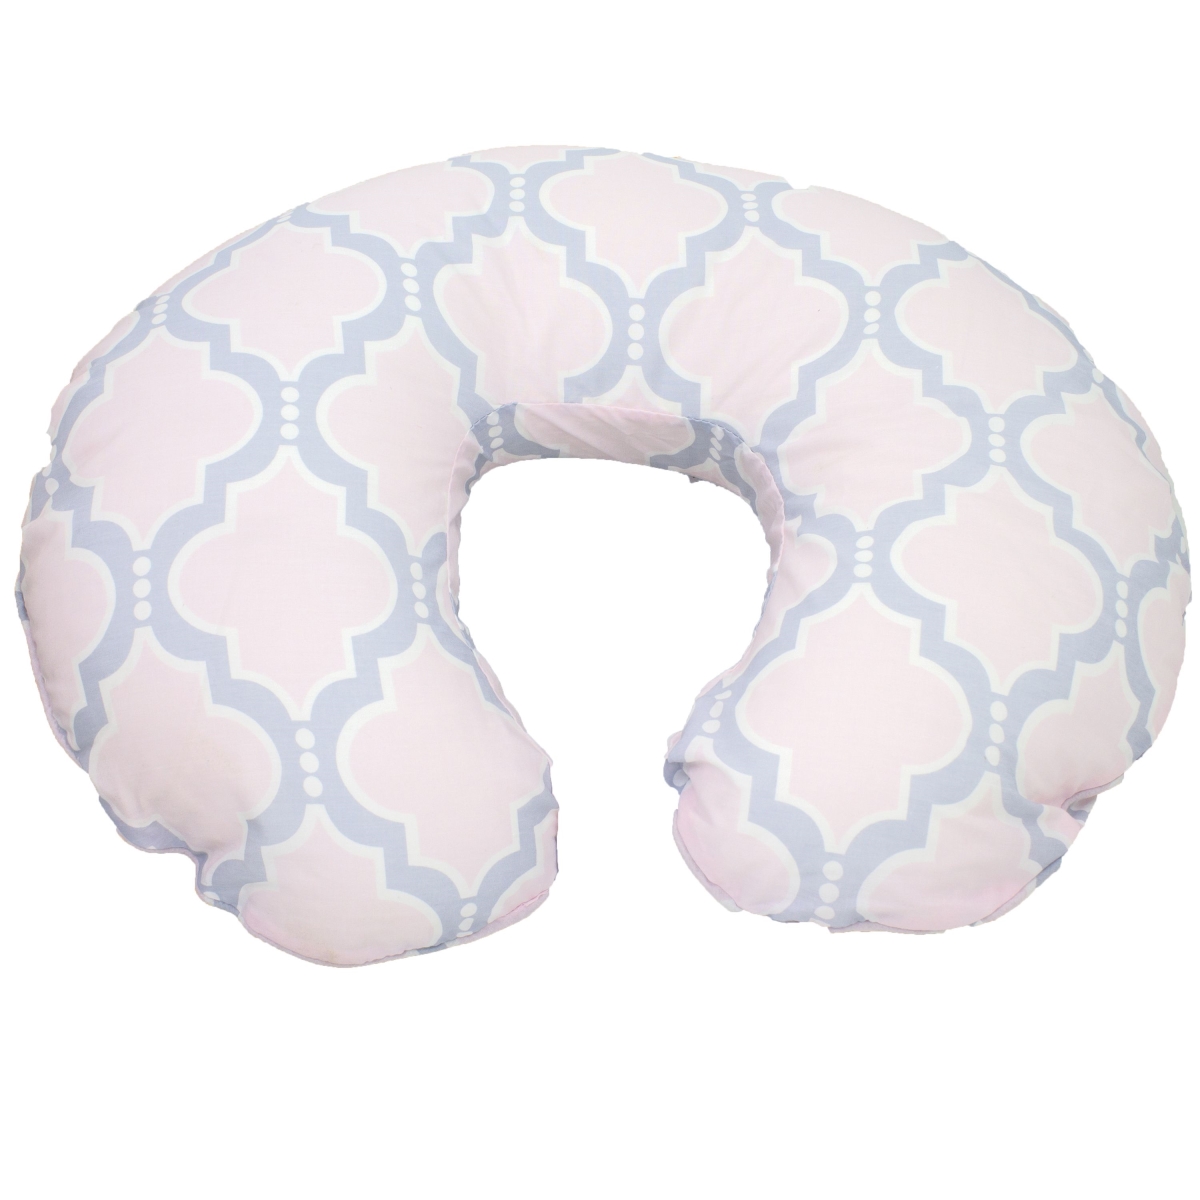 Picture of Pam Grace Creations  Pink Medallion Nursing Pillow Cover